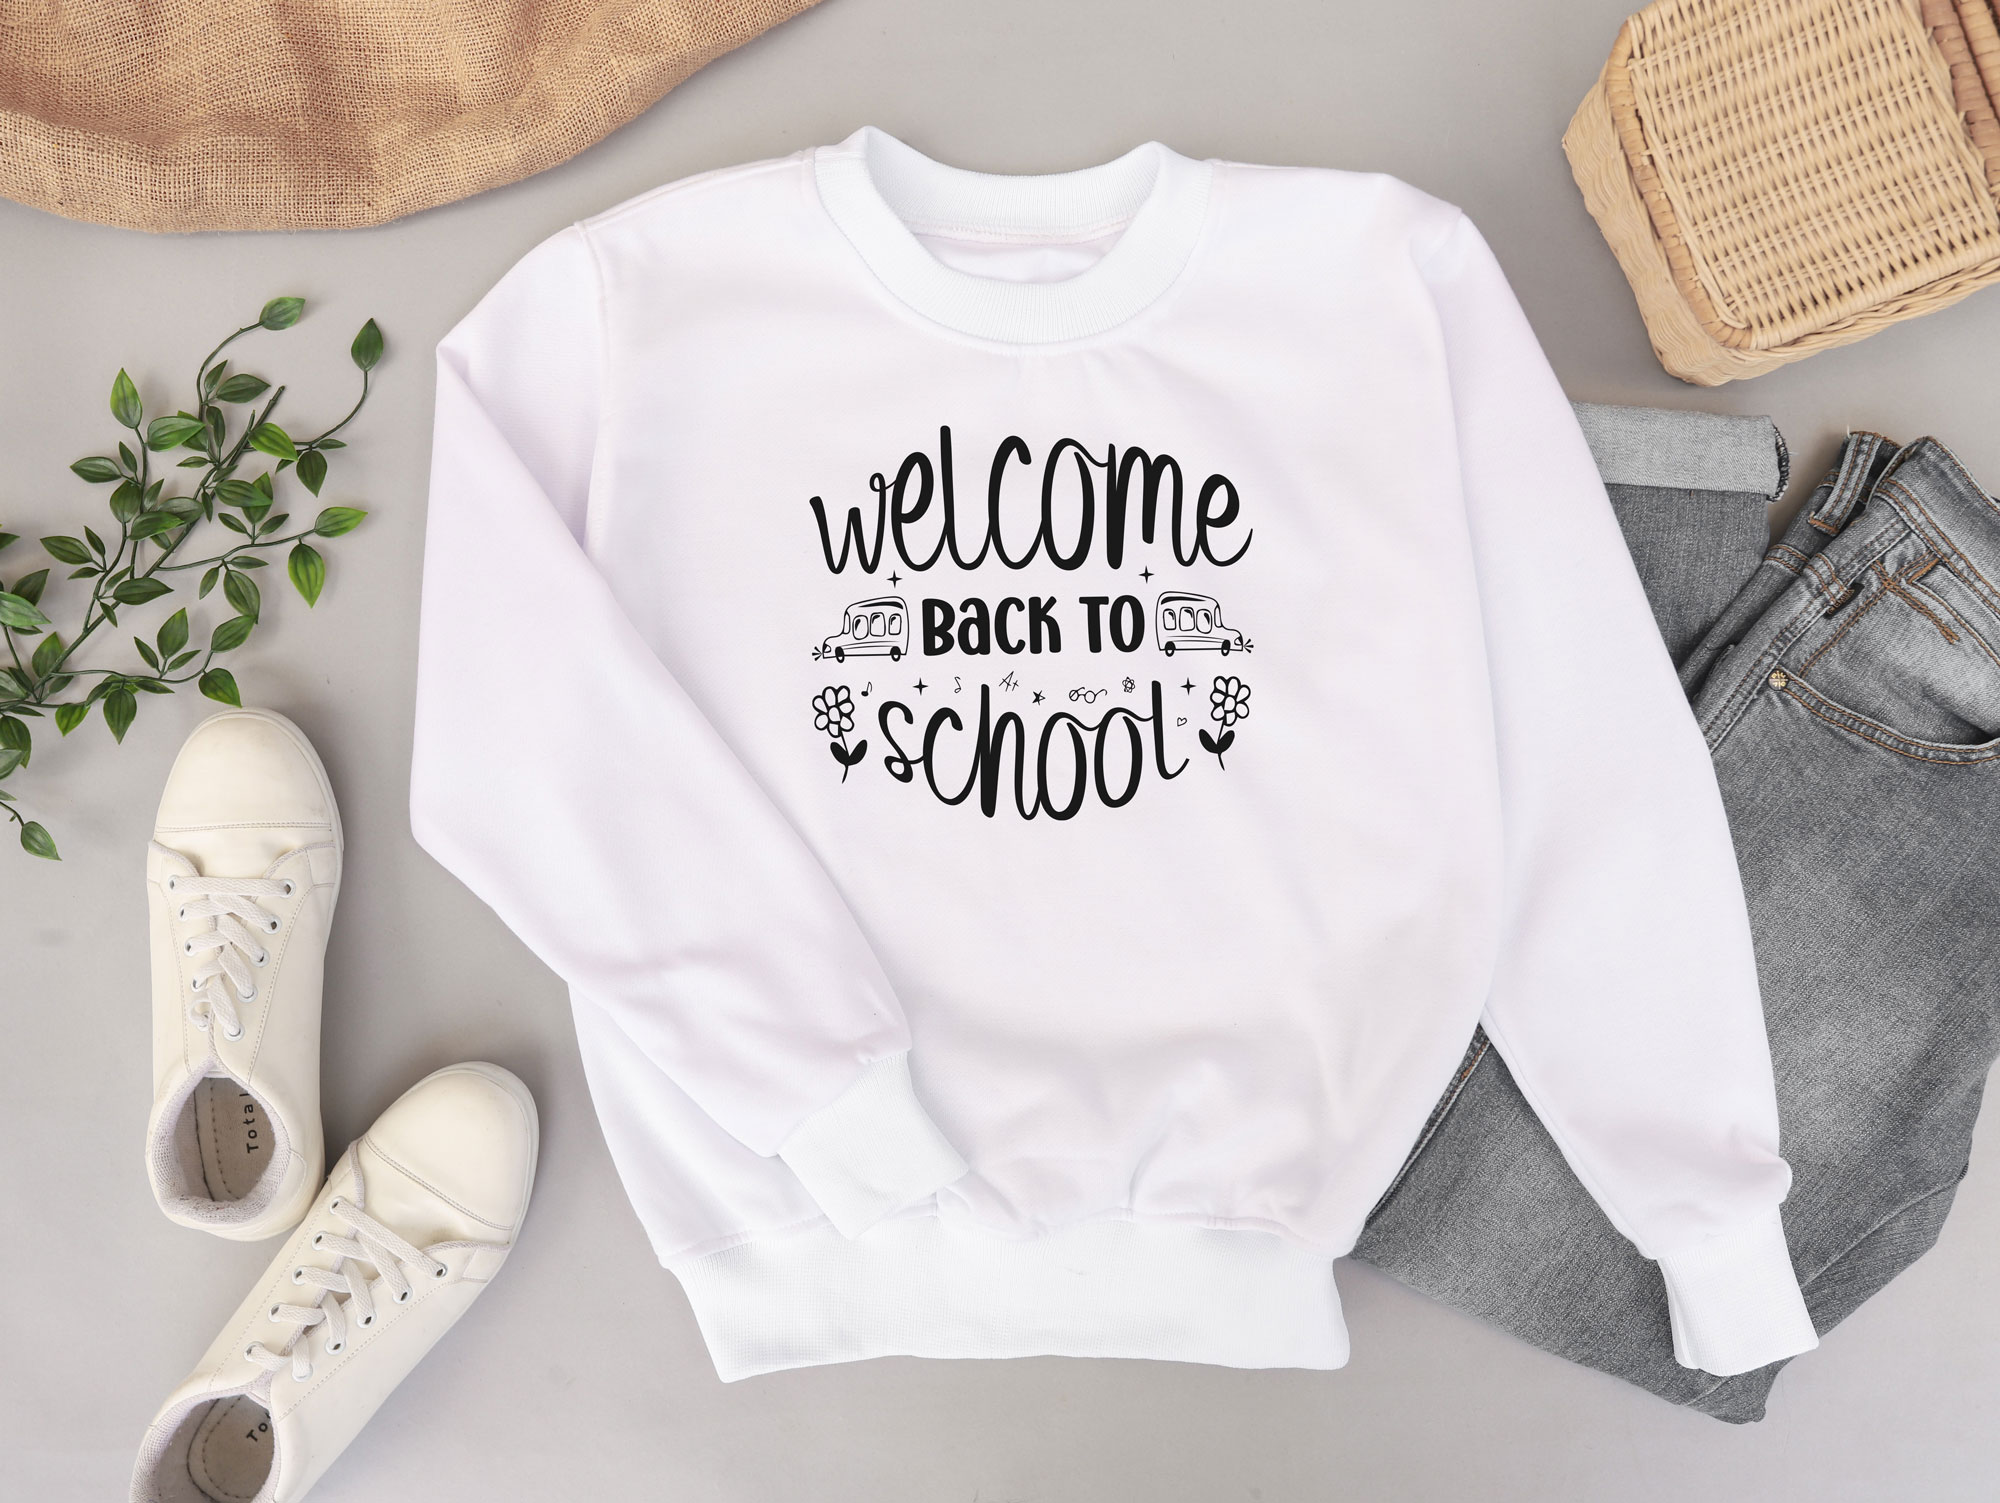 Image of a white sweatshirt with a wonderful inscription Welcome back to school